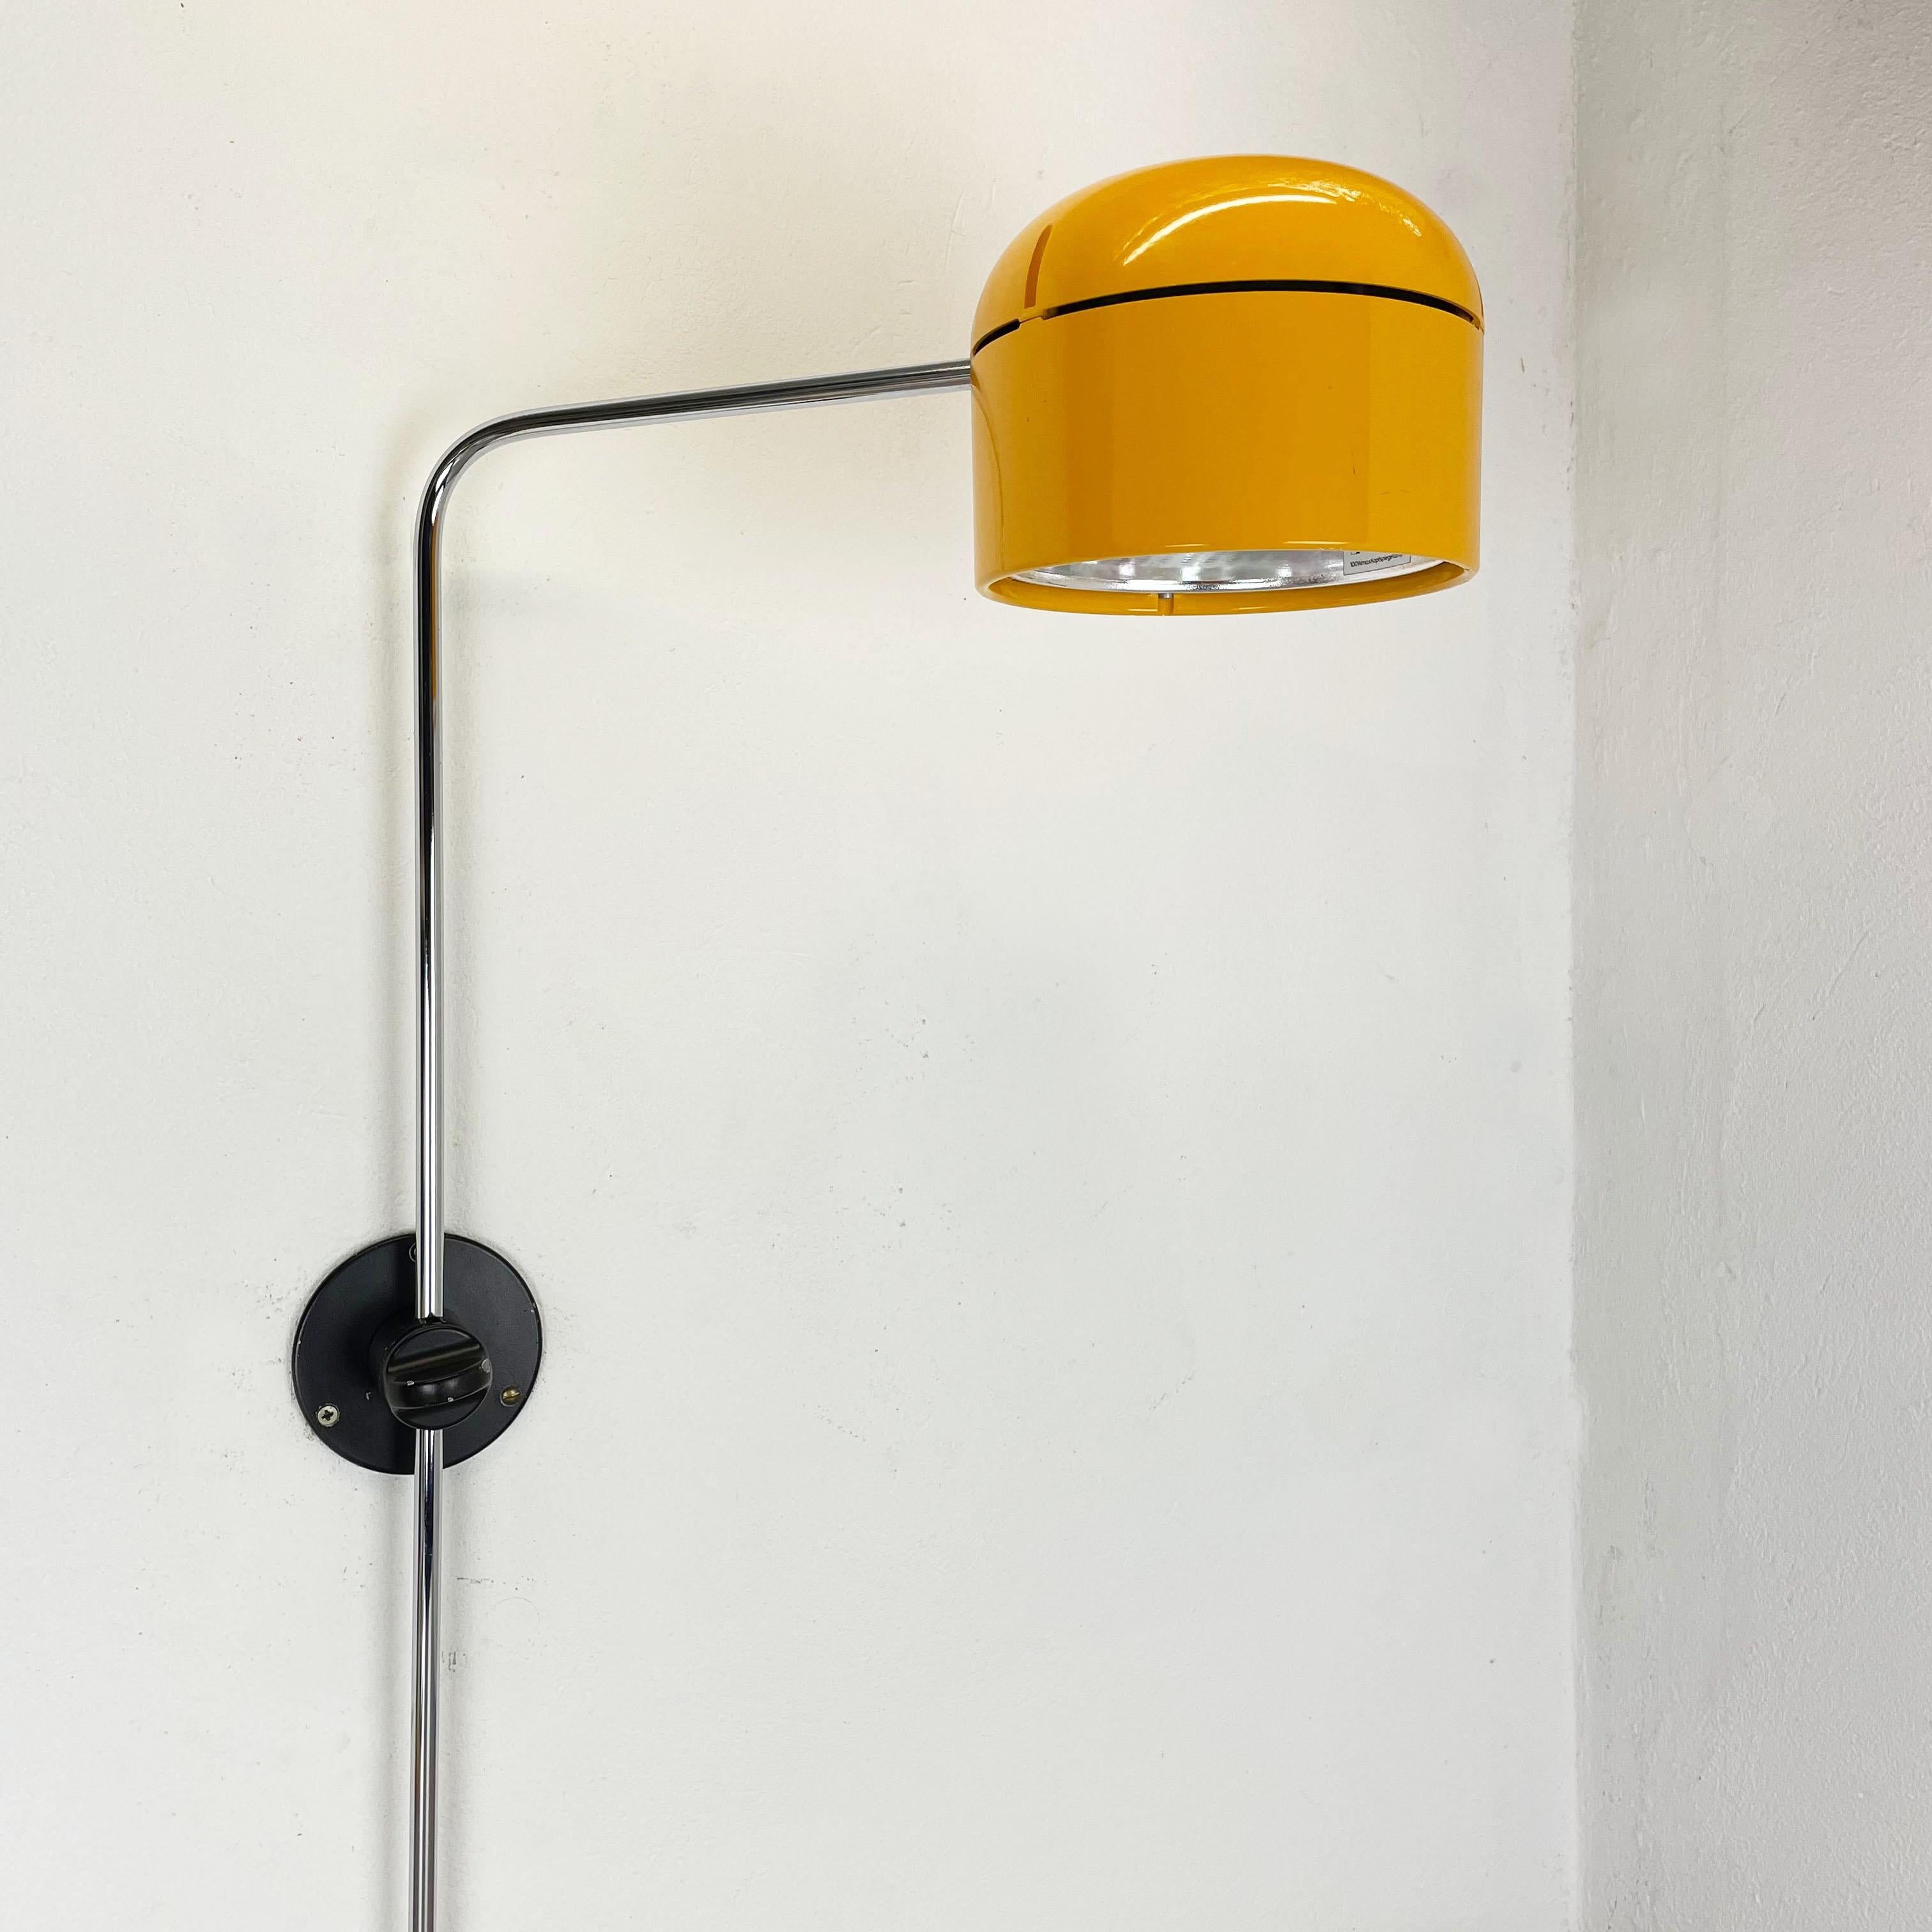 Article:

Yellow adjustable wall light


Producer:

 Staff Lights, Germany (see label inside the shade)


Age:

 1970s


This extraordinary pop art space age wall light was designed and produced by STAFF Lights in Germany in the